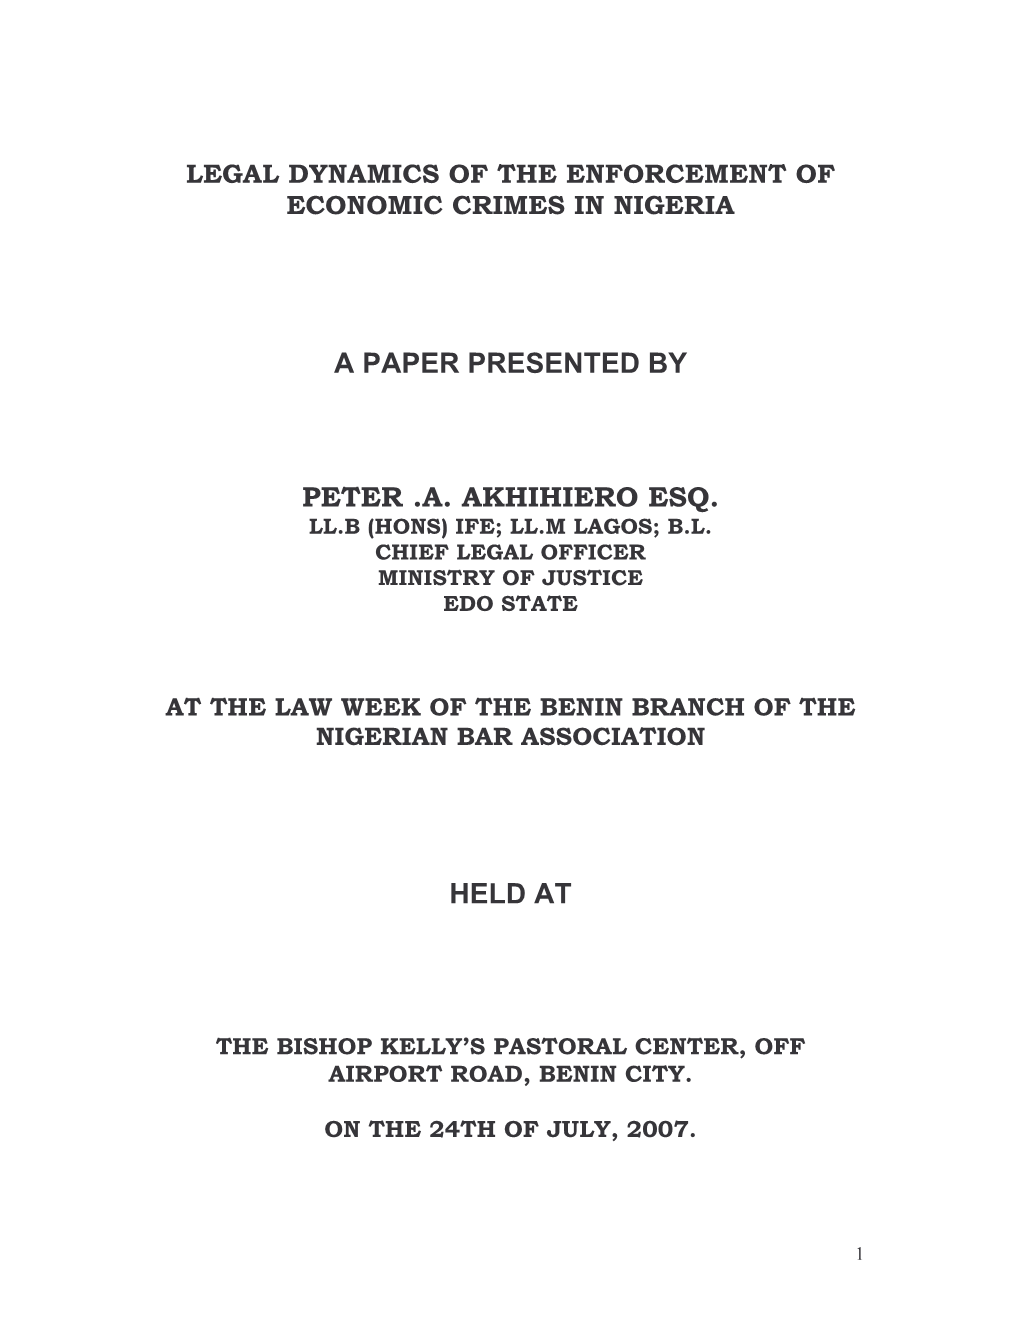 Legal Dynamics of the Enforcement of Economic Crimes in Nigeria